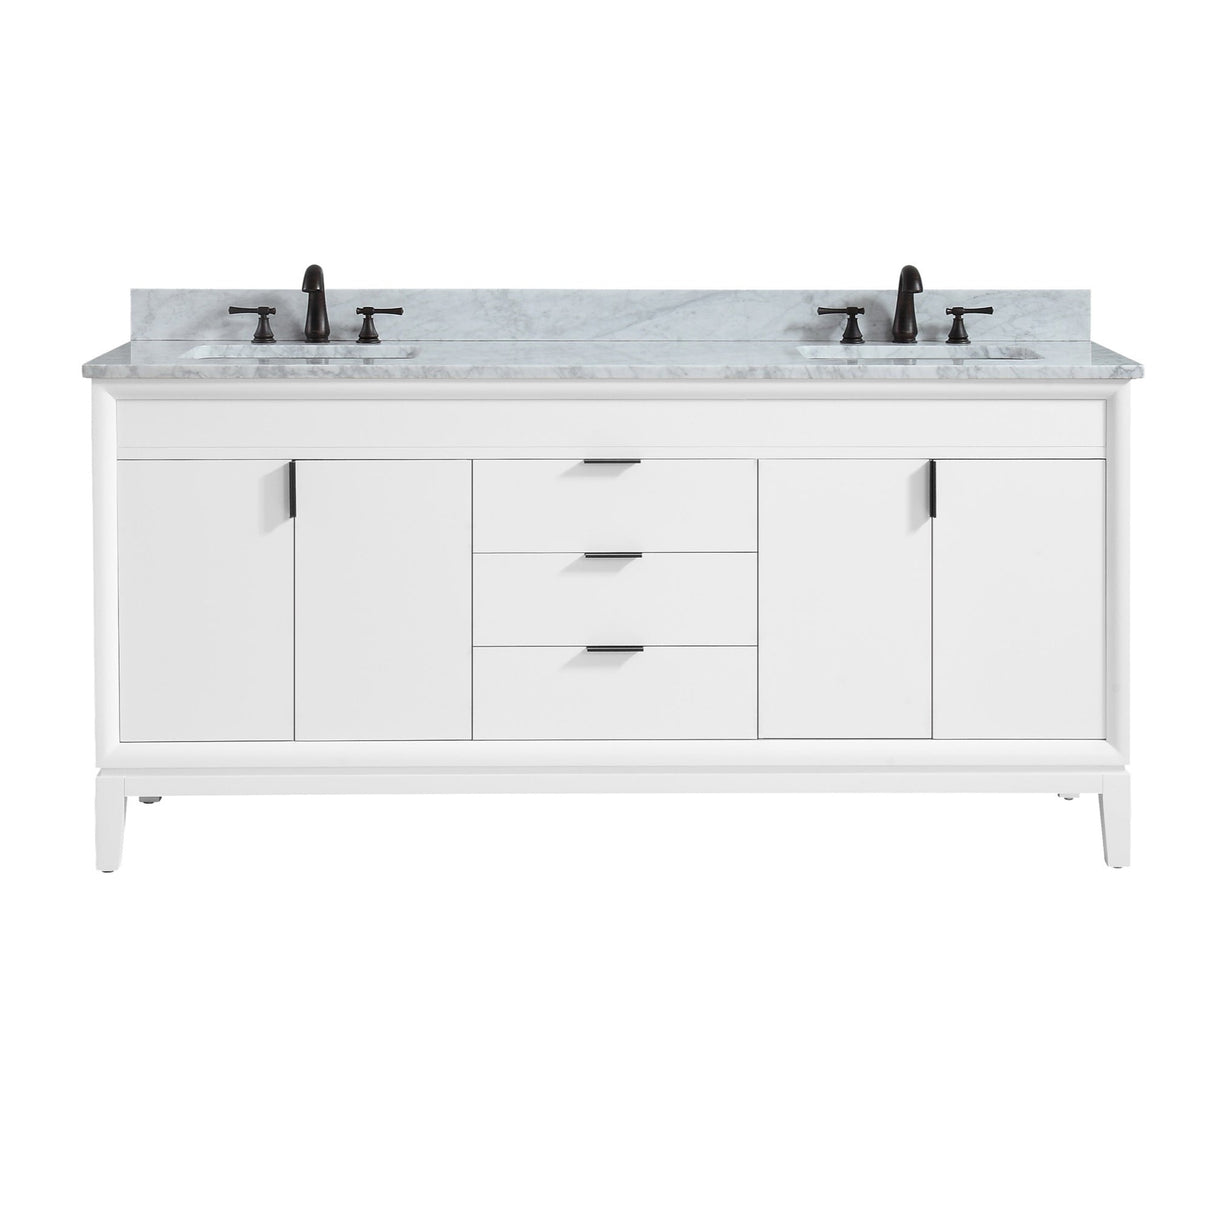 Avanity Emma 73 in. Vanity Combo in White with Carrara White Marble Top